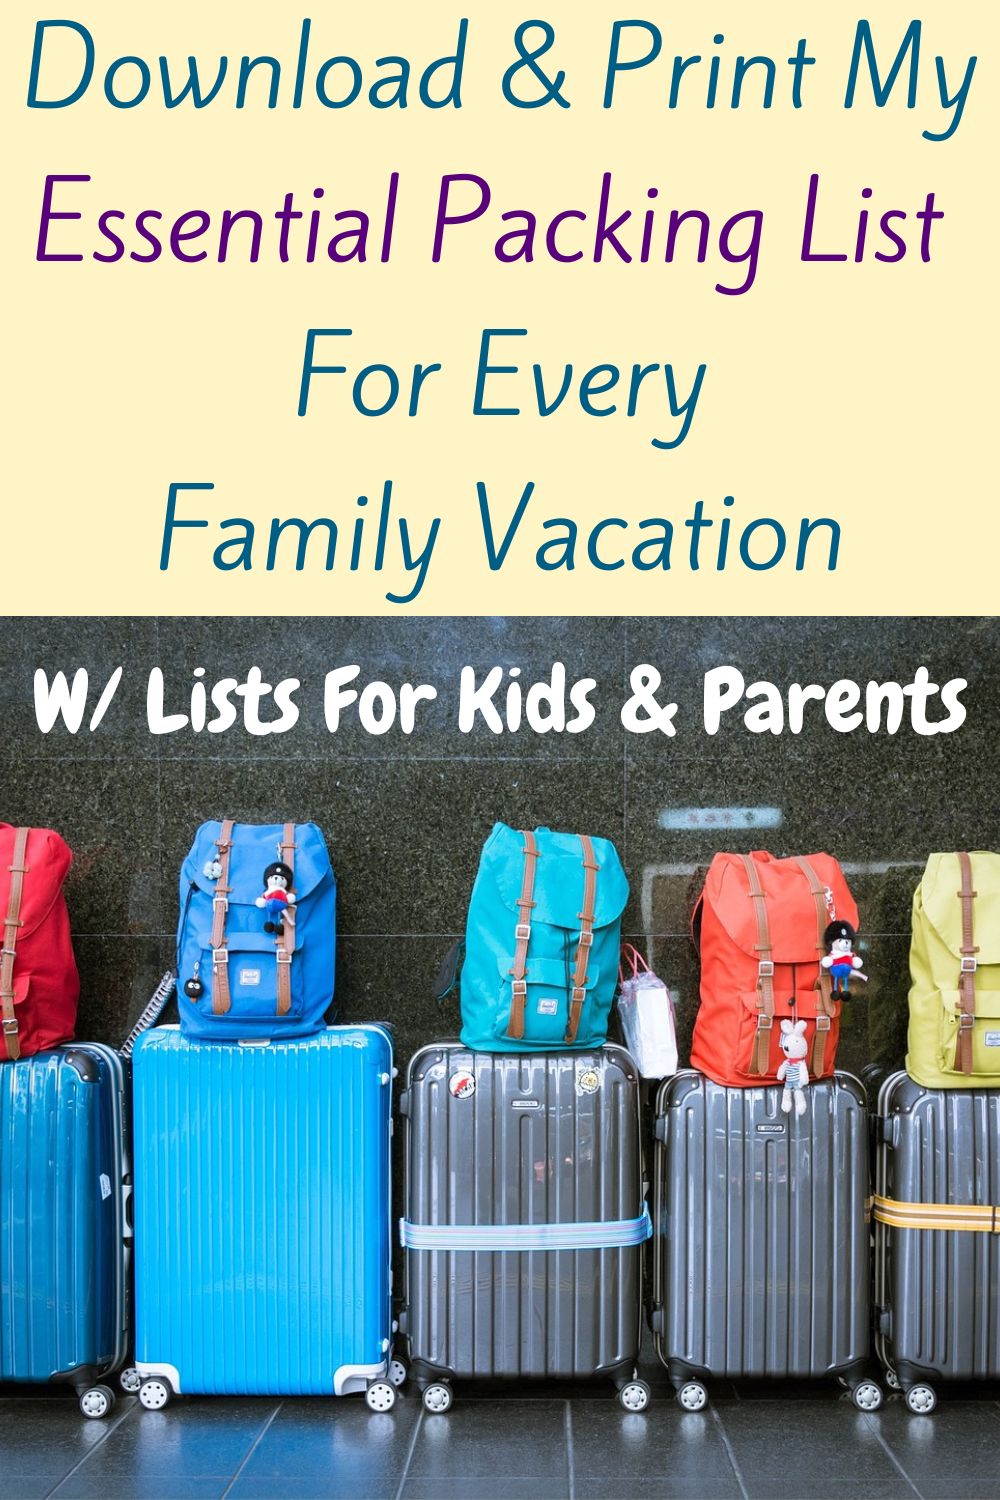 download & print my basic packing lists for every vacation: one for kids and one for parents.  